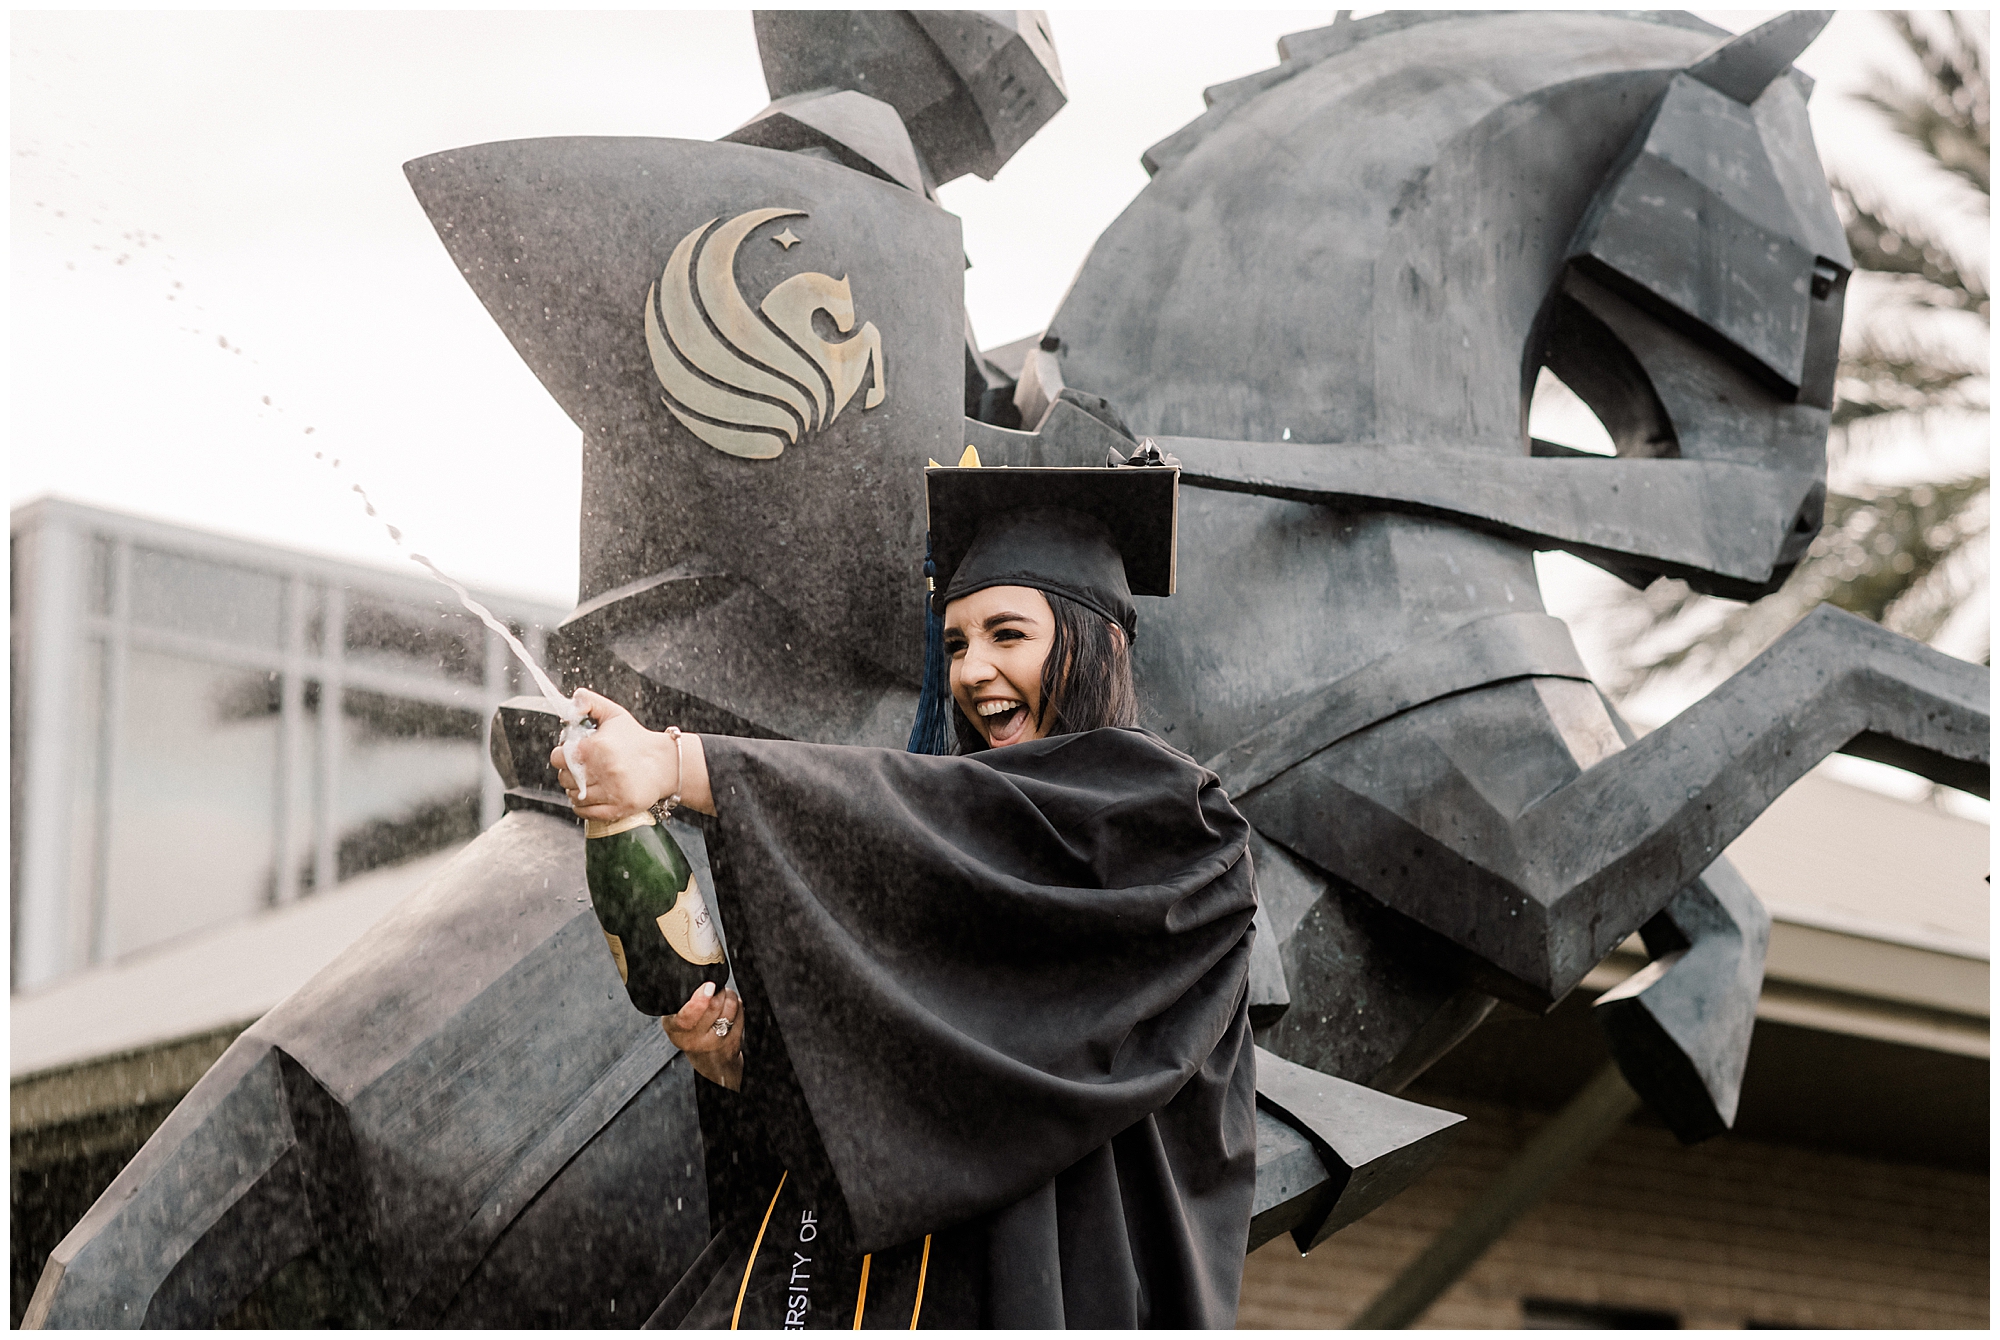 UCF Fall Graduation Session at the University of Central Florida | Haleigh Nicole Photography | UCF Graduation Photographer | This UCF fall graduation session featured shades of gold and black. The UCF graduate was an Elementary Education major and celebrated with champagne and confetti in the rain. #confettigraduate #champagnegraduate #ucfgraduation #ucf #classof2020 #ucfgraduationphotographer #orlandoportraitphotographer